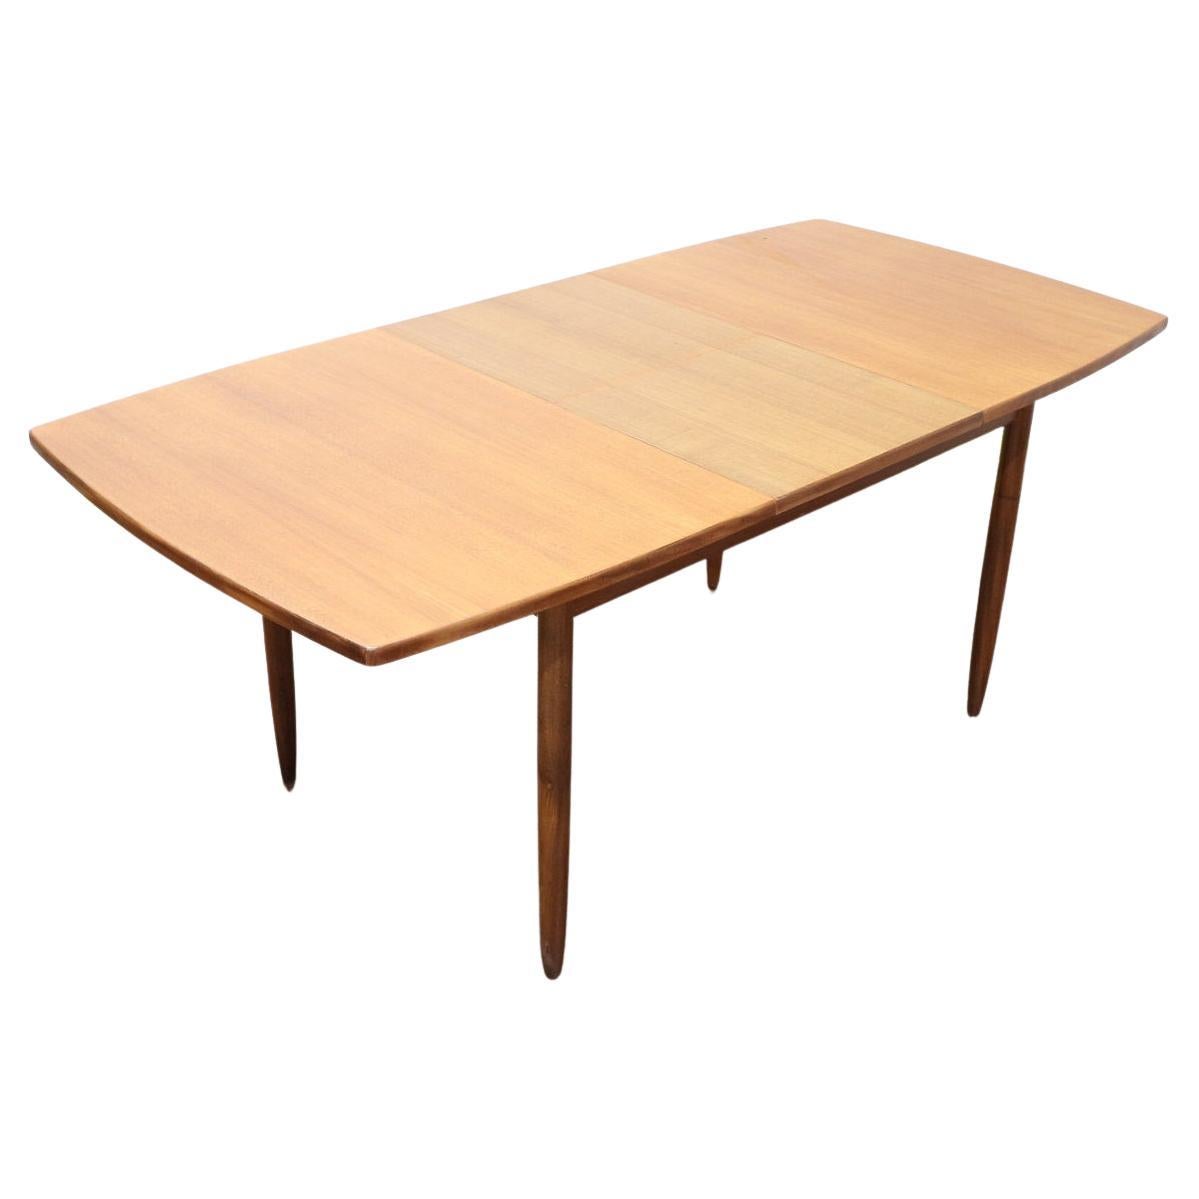 A beautiful teak extending dining table by British furniture maker, William Lawrence. This table has beautiful golden grain and can sit 4 people or 6 comfortably when extended. The extension piece is in built and just folds out 

 

Dimensions